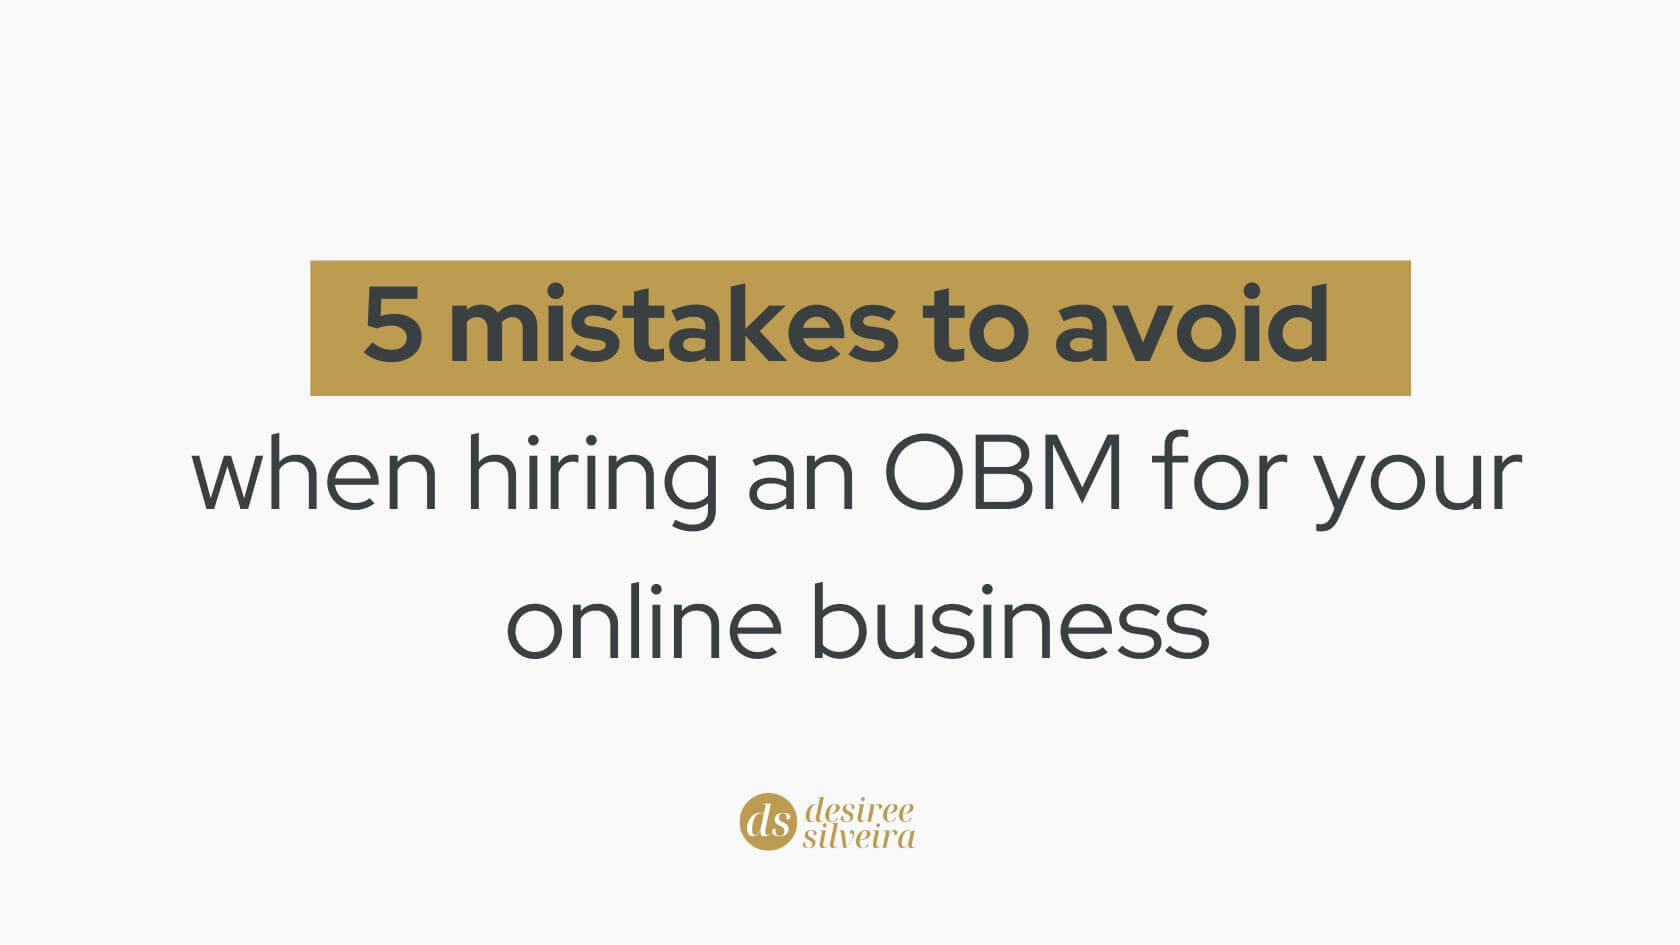 5 mistakes to avoid when hiring an OBM for your online business | Desiree Silveira